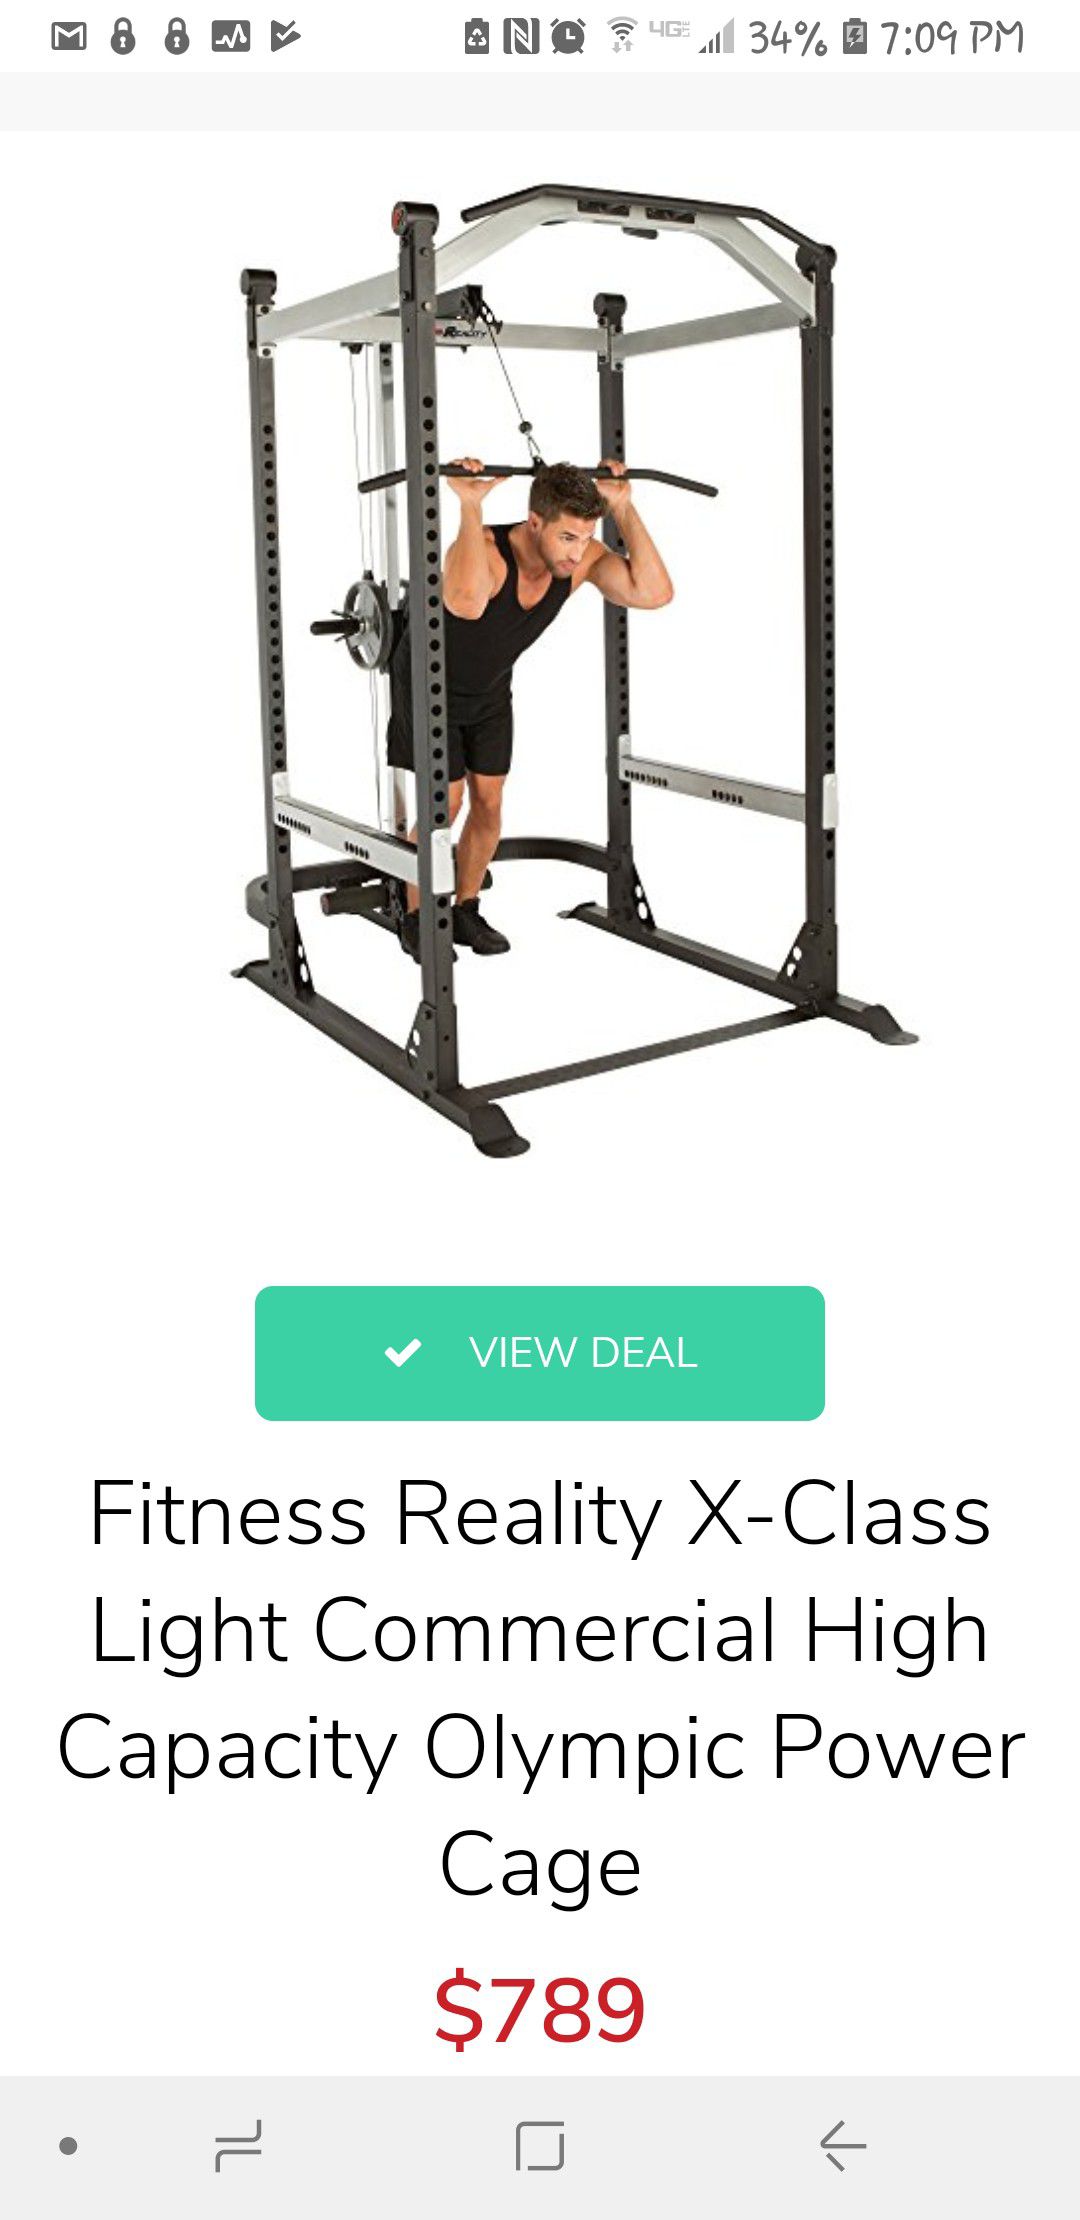 Fitness Reality X-Class Light Commercial High Capacity Olympic